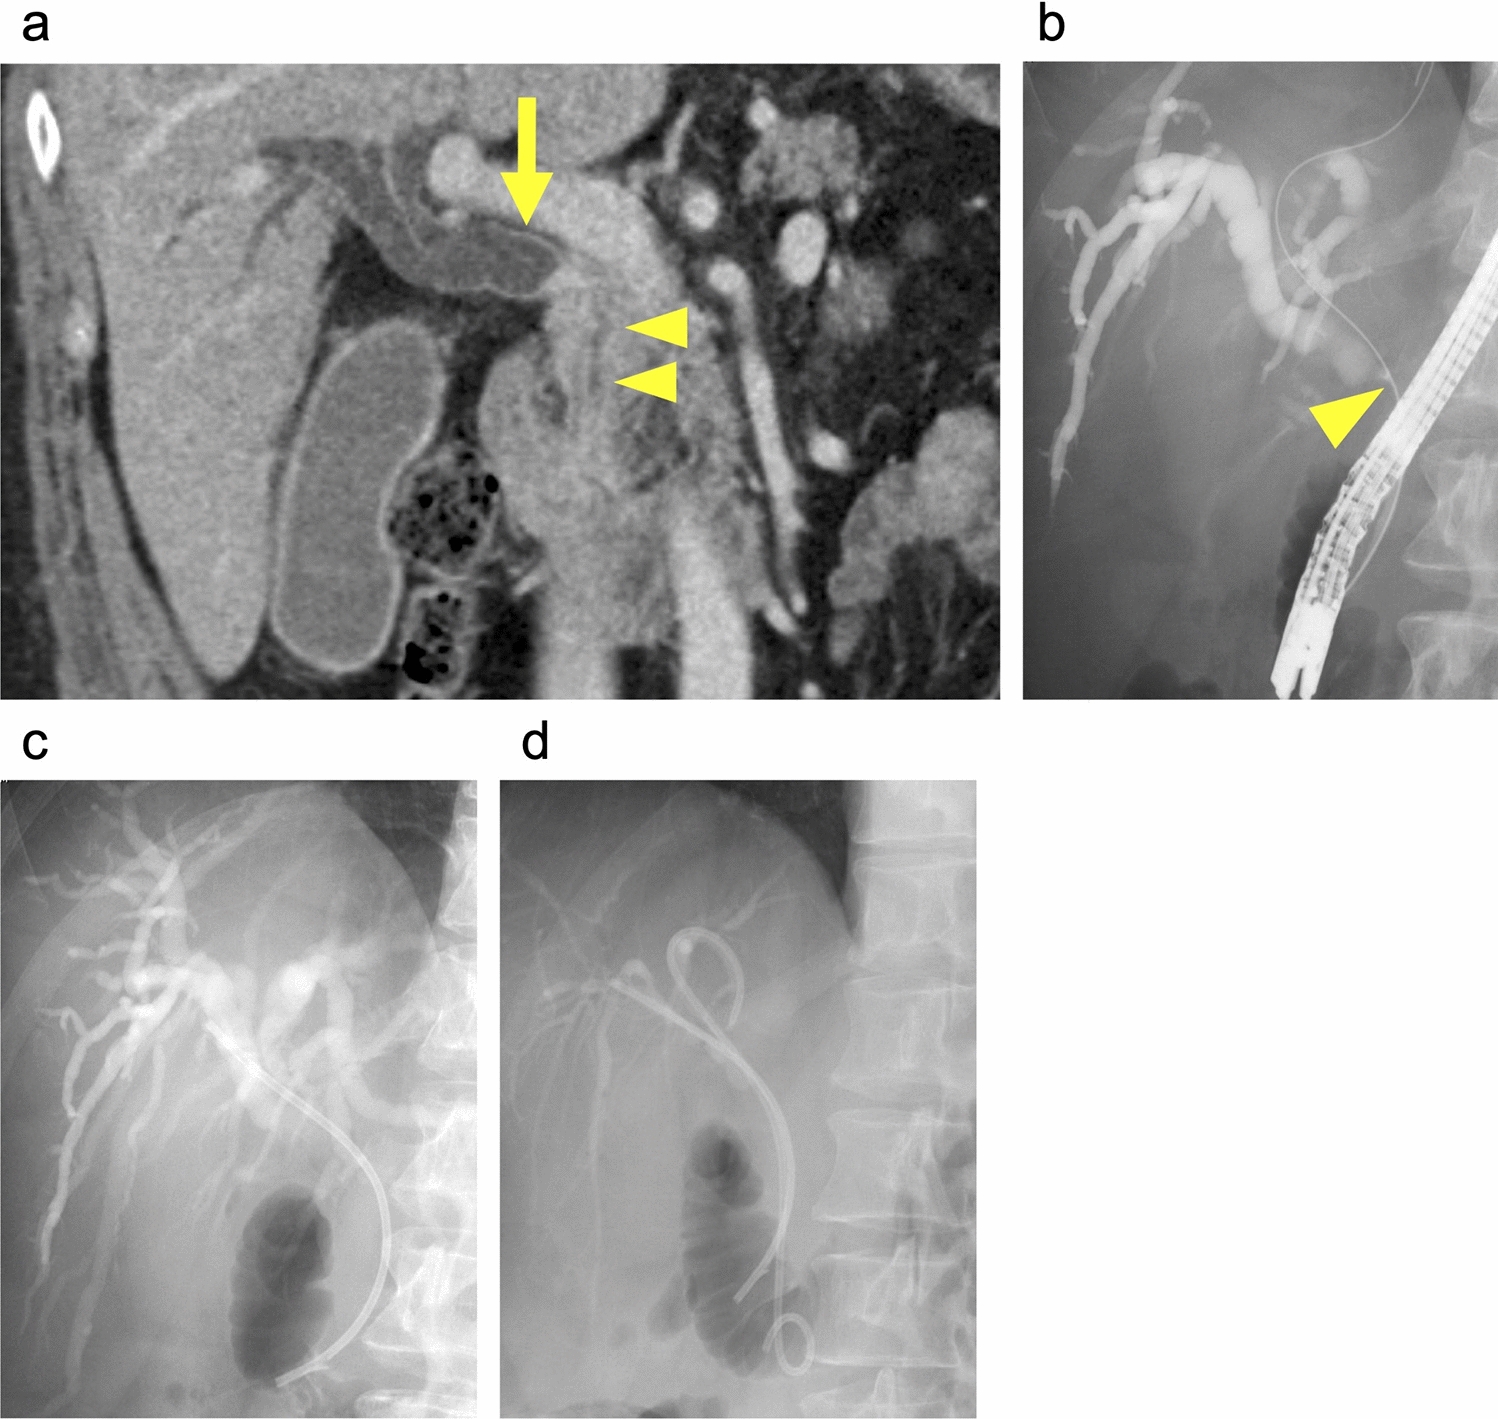 Pancreaticoduodenectomy after bilirubin adsorption for distal cholangiocarcinoma with severe obstructive jaundice refractory to repeat preoperative endoscopic biliary drainage: a case report